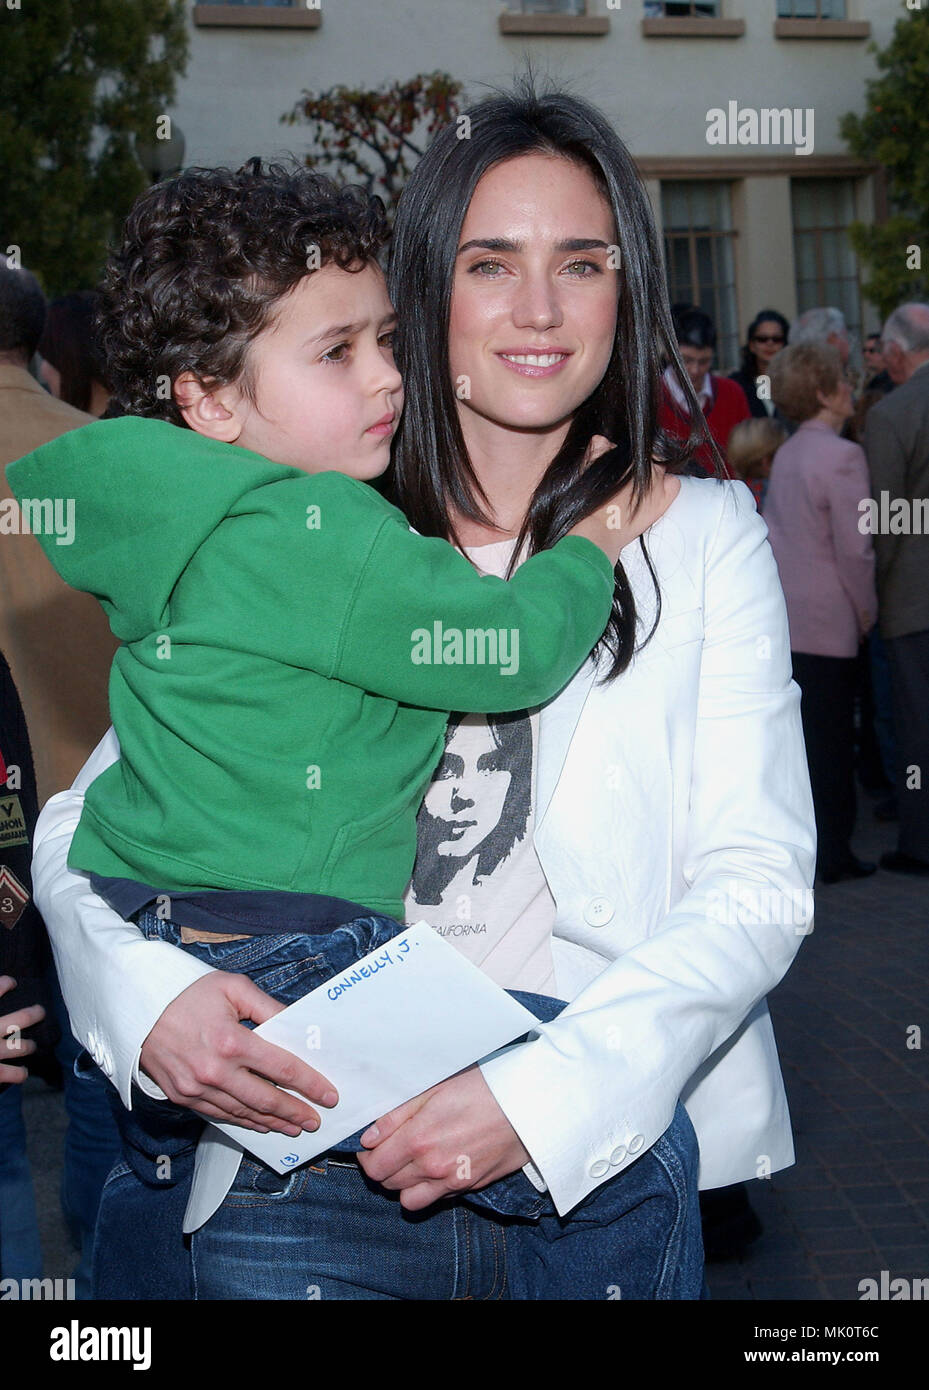 Jennifer Connelly posing with son Kyle  at the Jimmy Neutron: Boy Genius premiere on the Paramount lot in Los Angeles. December 9, 2001.           -            ConnellyJennifer Kyle01.JPG           -              ConnellyJennifer Kyle01.JPGConnellyJennifer Kyle01  Event in Hollywood Life - California,  Red Carpet Event, Vertical, USA, Film Industry, Celebrities,  Photography, Bestof, Arts Culture and Entertainment, Topix Celebrities fashion /  from the Red Carpet-, Vertical, Best of, Hollywood Life, Event in Hollywood Life - California,  Red Carpet , USA, Film Industry, Celebrities,  movie cel Stock Photo